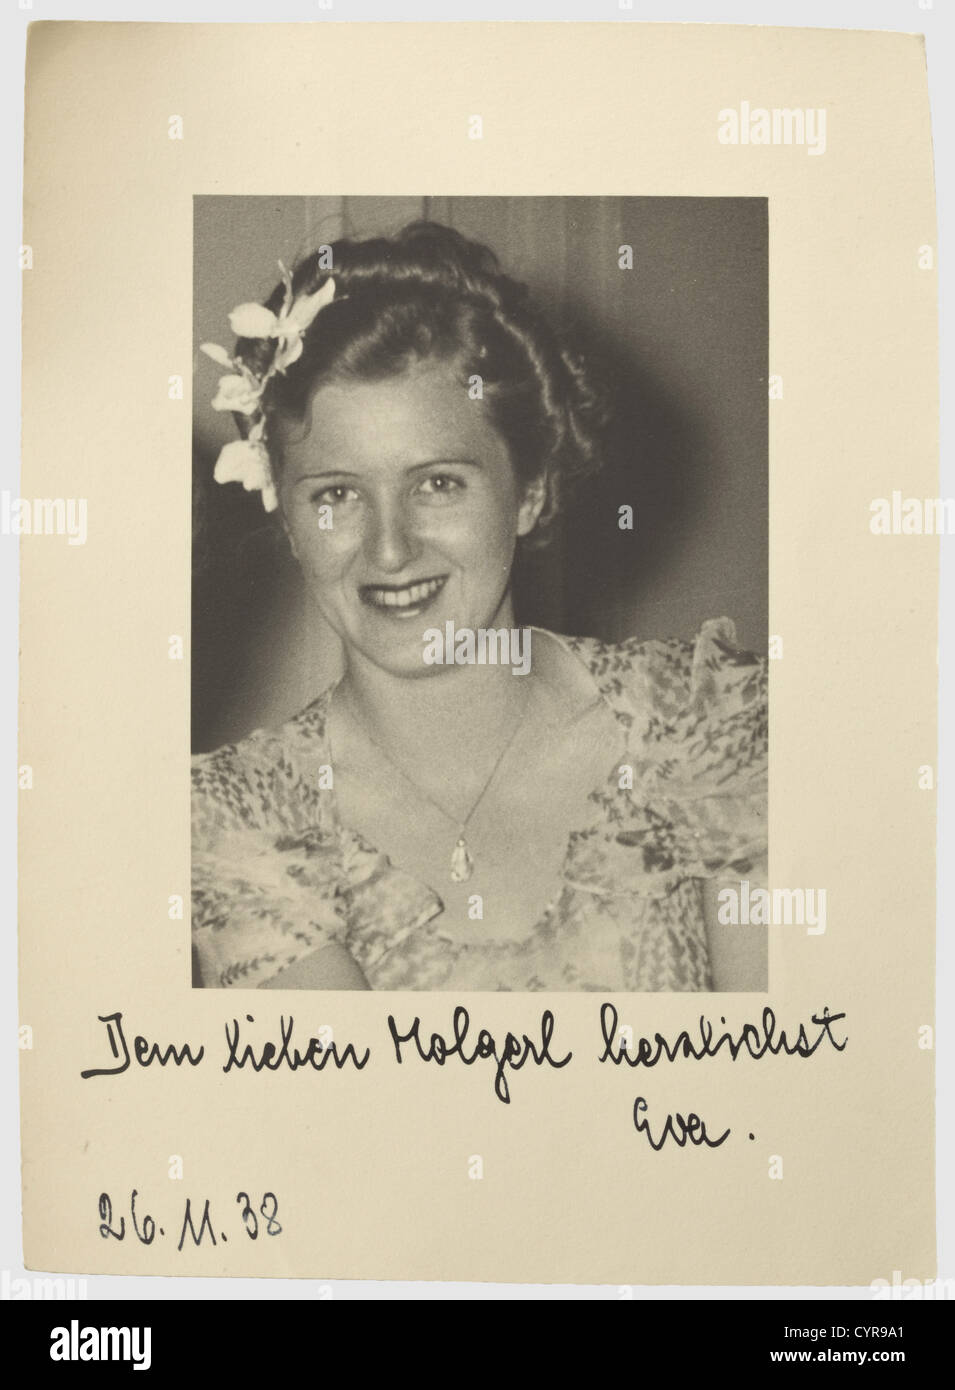 Eva Braun, a dedication photograph 26 November 1938 A portrait photograph, Eva Braun wearing a summer dress and a necklace, her hair pinned-up and decorated with blossoms. On the lower rim a handwritten dedication in dark ink 'Dem lieben Molgerl herzlichst Eva. 26.11.38' (To my dear Molgerl love Eva. 26.11.38). 18.7 x 13.7 cm. According to the family a friend of the family. To our knowledge a previously unknown photograph of Eva Braun, therefore especially rare, people, 1930s, 20th century, NS, National Socialism, Nazism, Third Reich, German Reich, Germany, Ger, Stock Photo